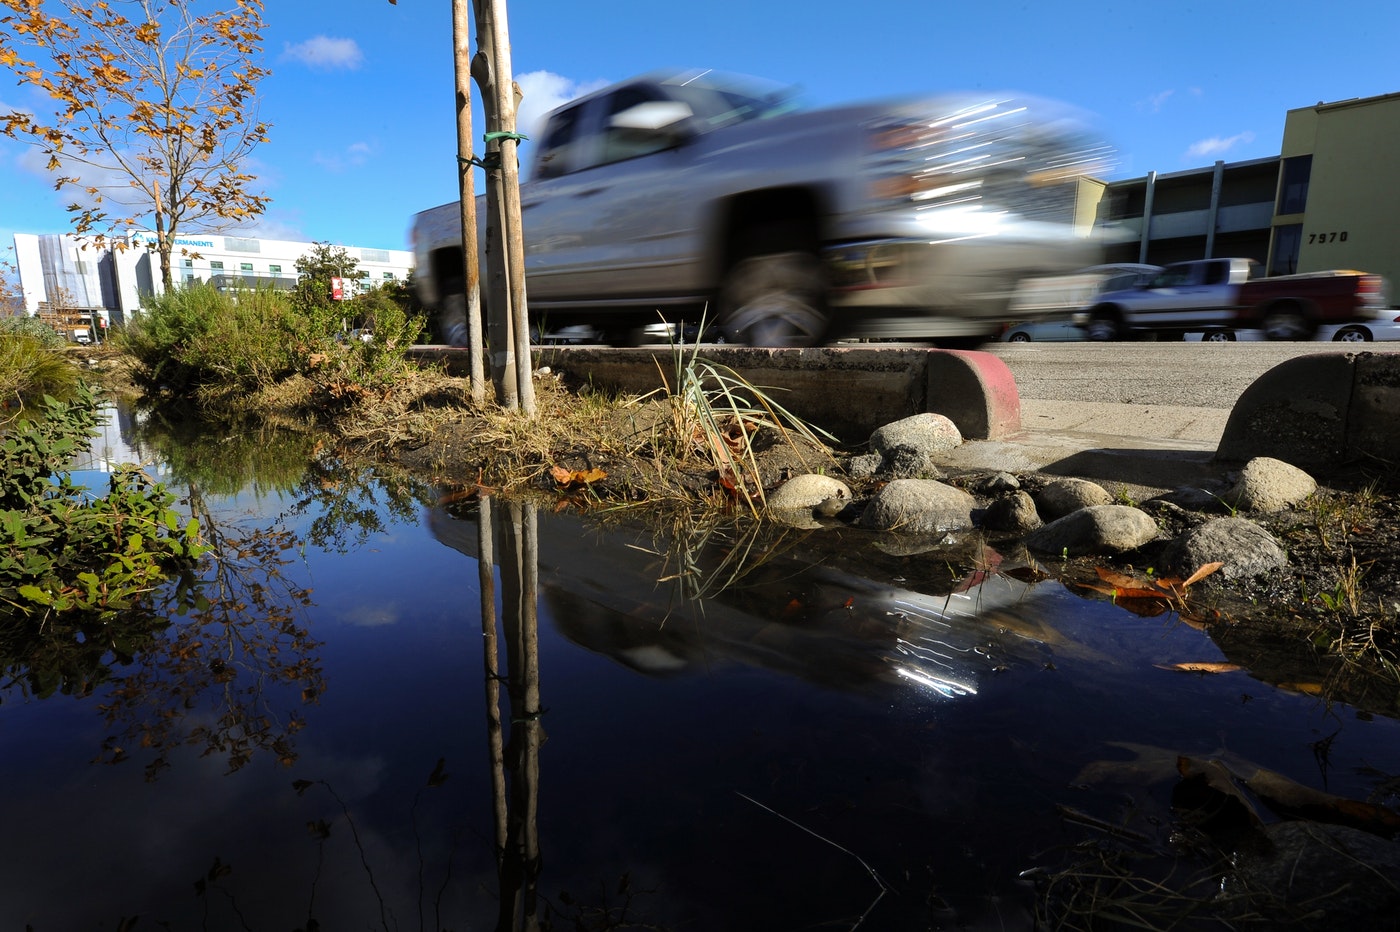 Cars drive along Woodman Avenue in Panorama City, Calif., Jan. 7, 2016, beside a culvert where rainwater runoff is directed to a bioswale on the side of the street. (Michael Owen Baker, AP)